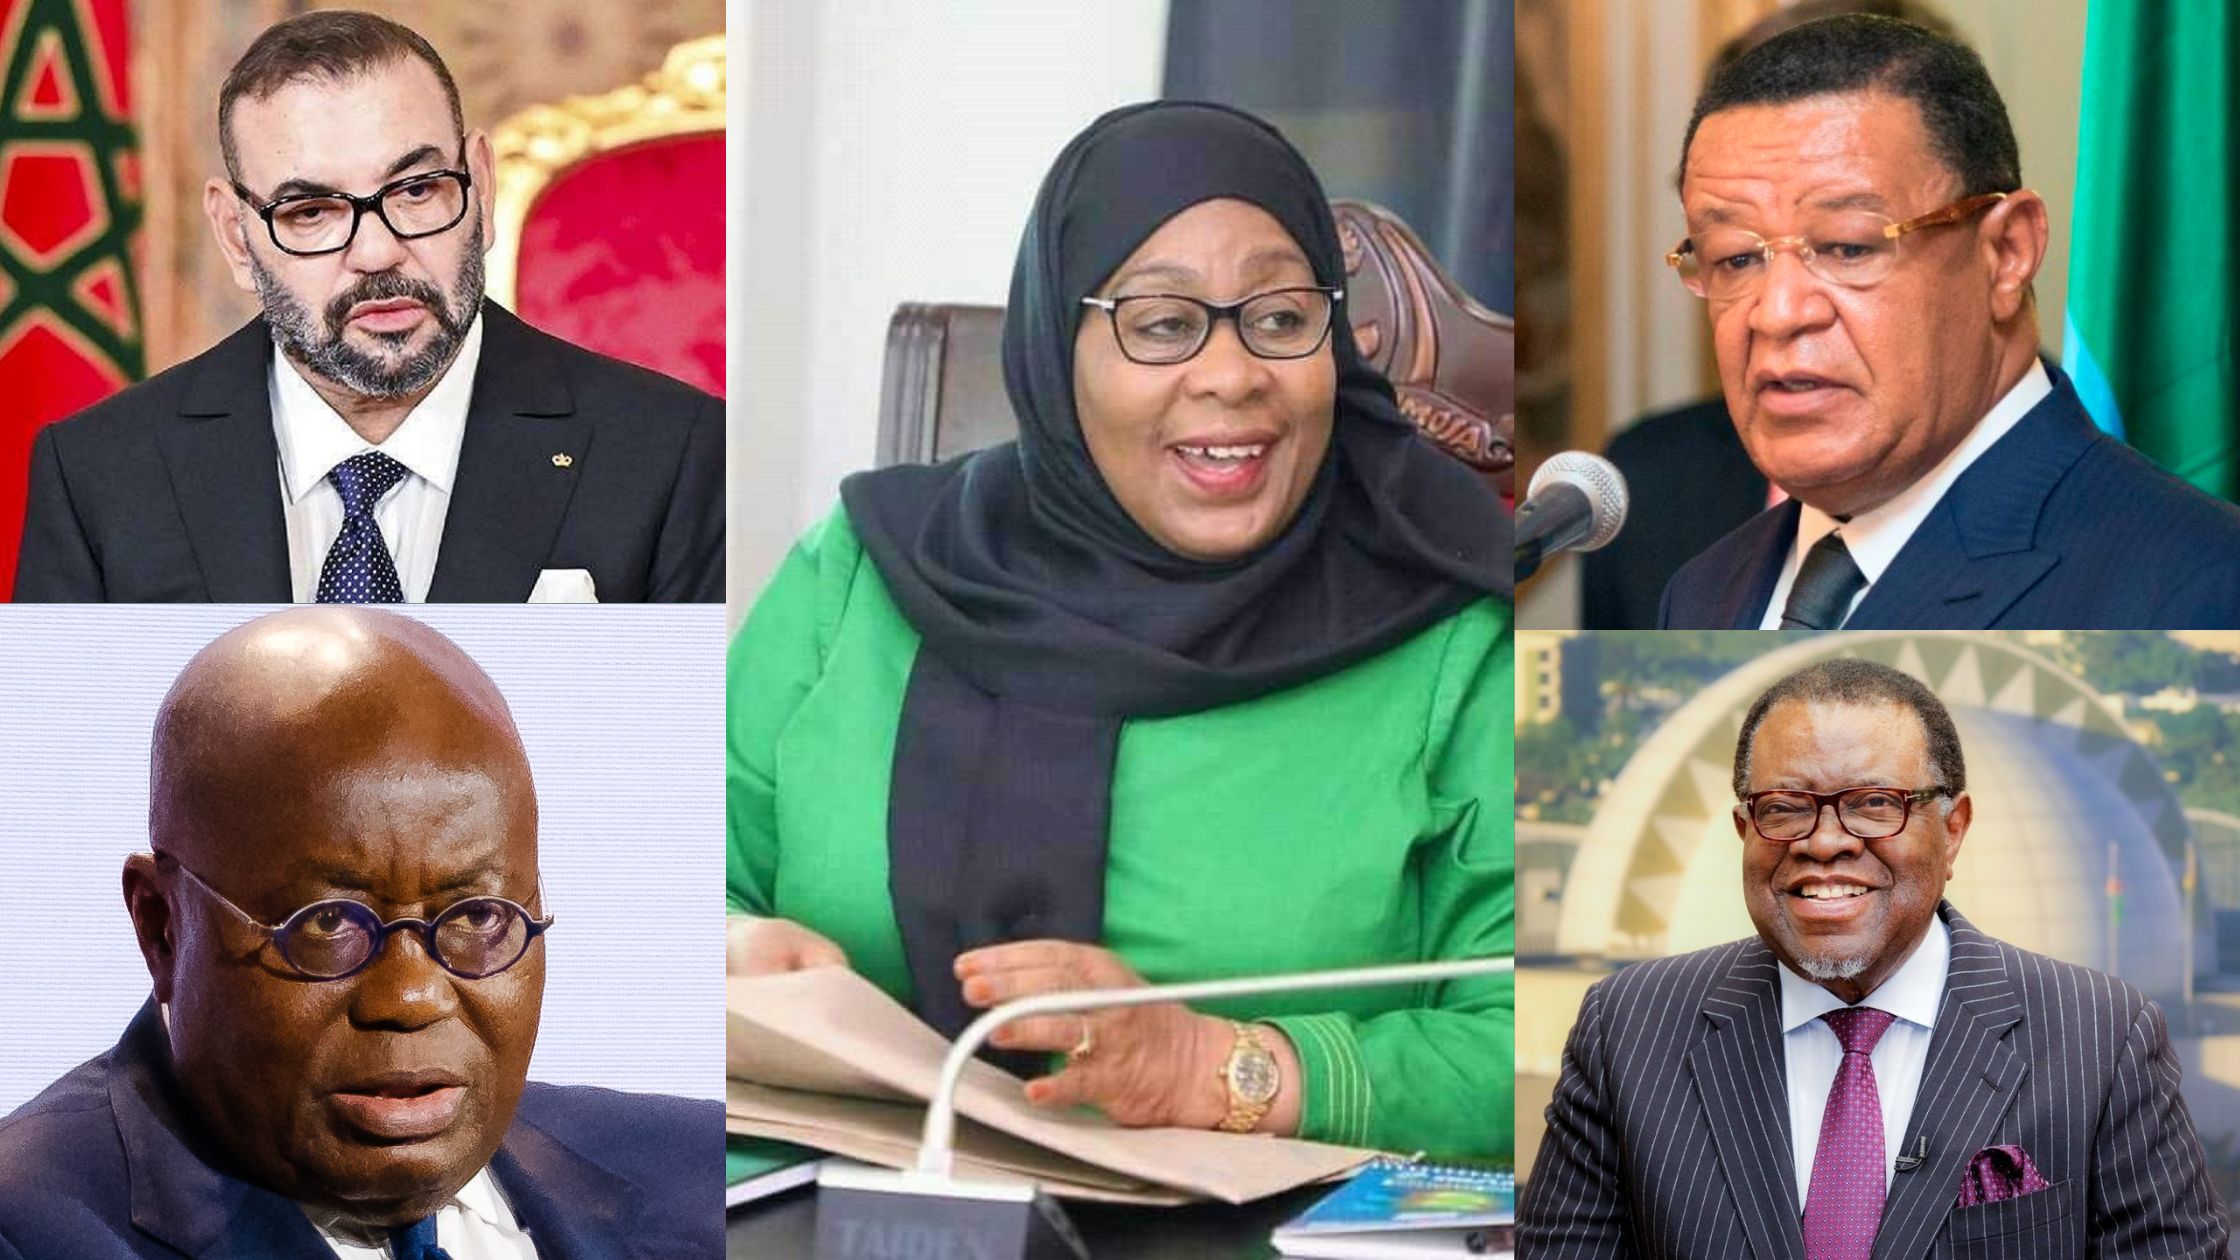 Top 10 Most Educated Presidents in Africa